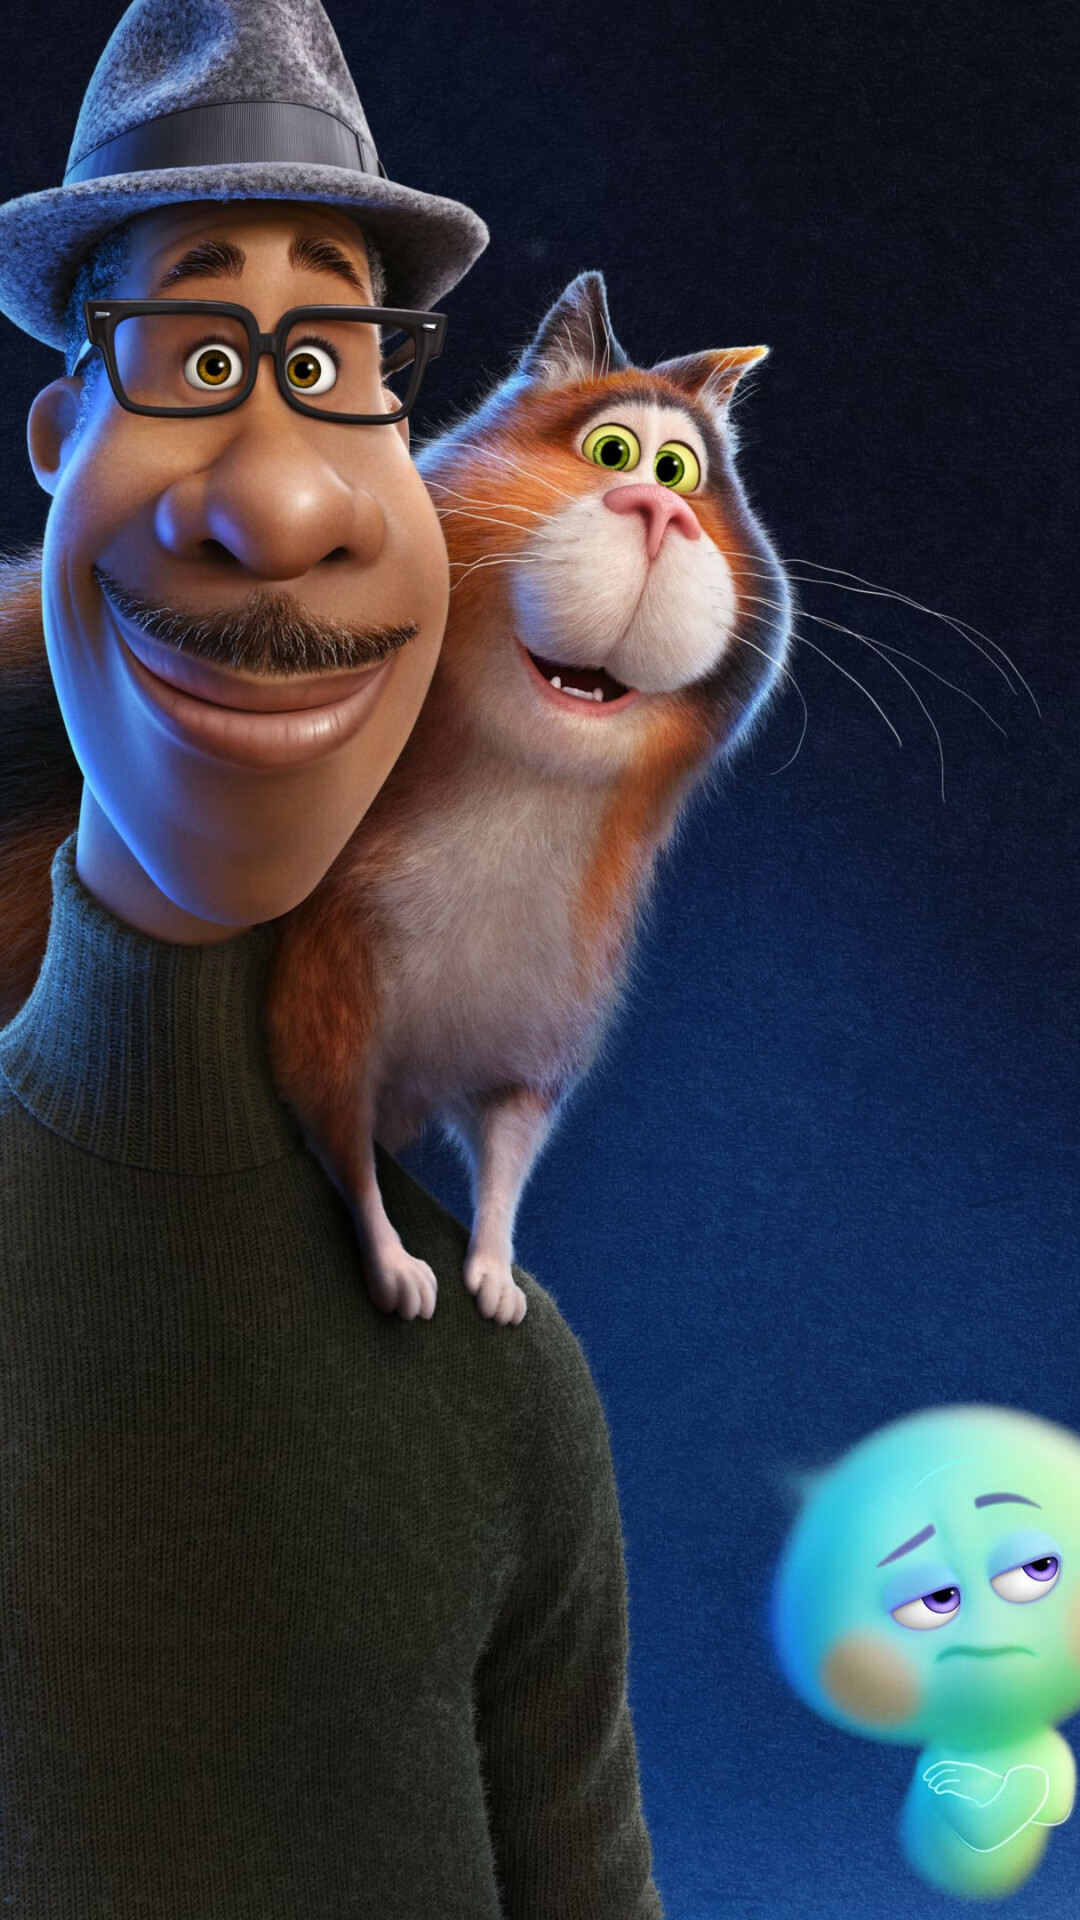 Soul (Pixar): Joe Gardner, Mr. Mittens, and 22, Pixar's first movie to be released on Christmas. 1080x1920 Full HD Background.